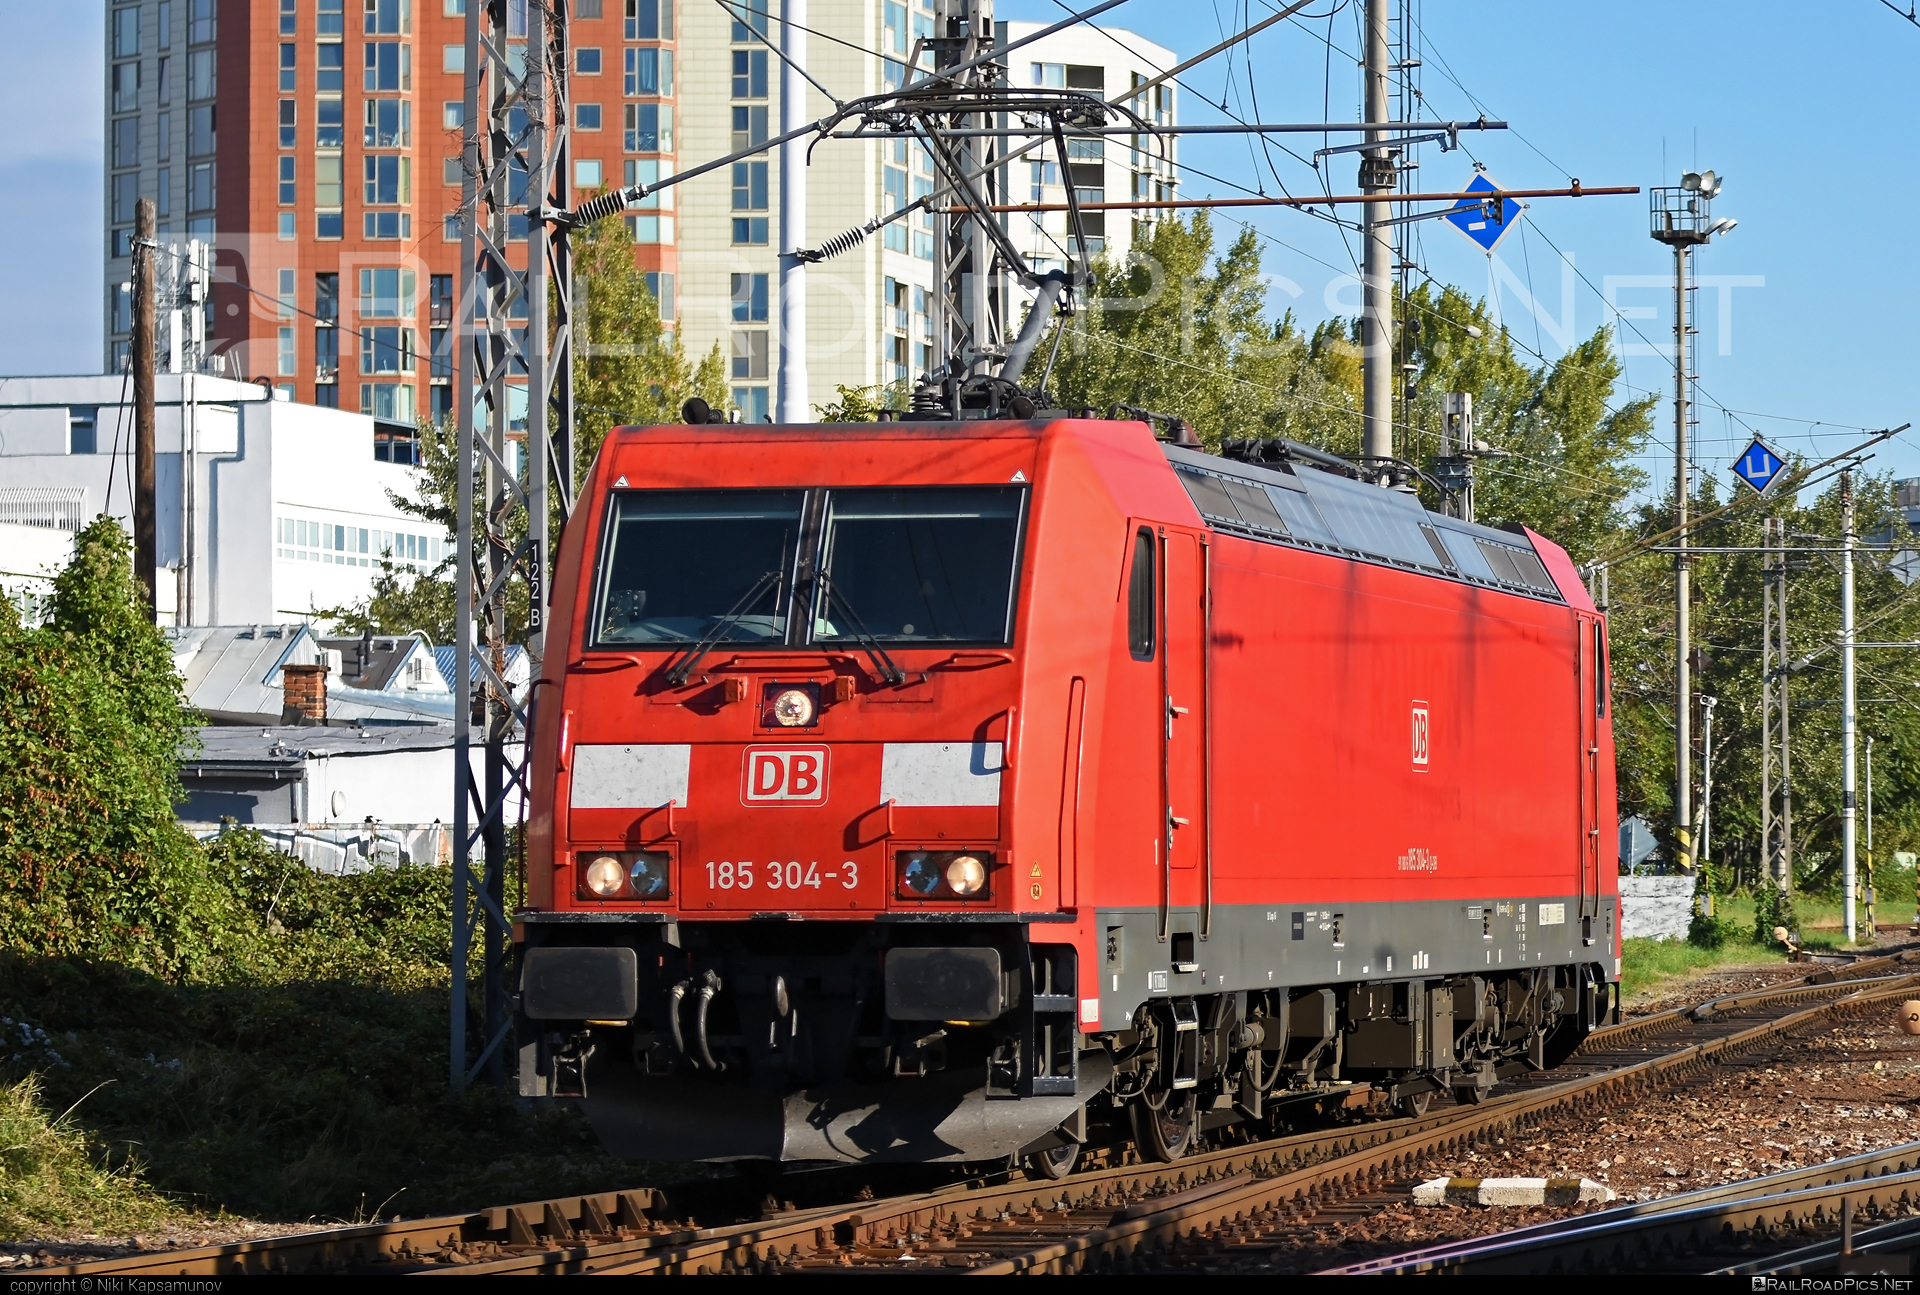 Bombardier TRAXX F140 AC2 - 185 304-3 operated by DB Cargo AG #bombardier #bombardiertraxx #db #dbcargo #dbcargoag #traxx #traxxf140 #traxxf140ac #traxxf140ac2